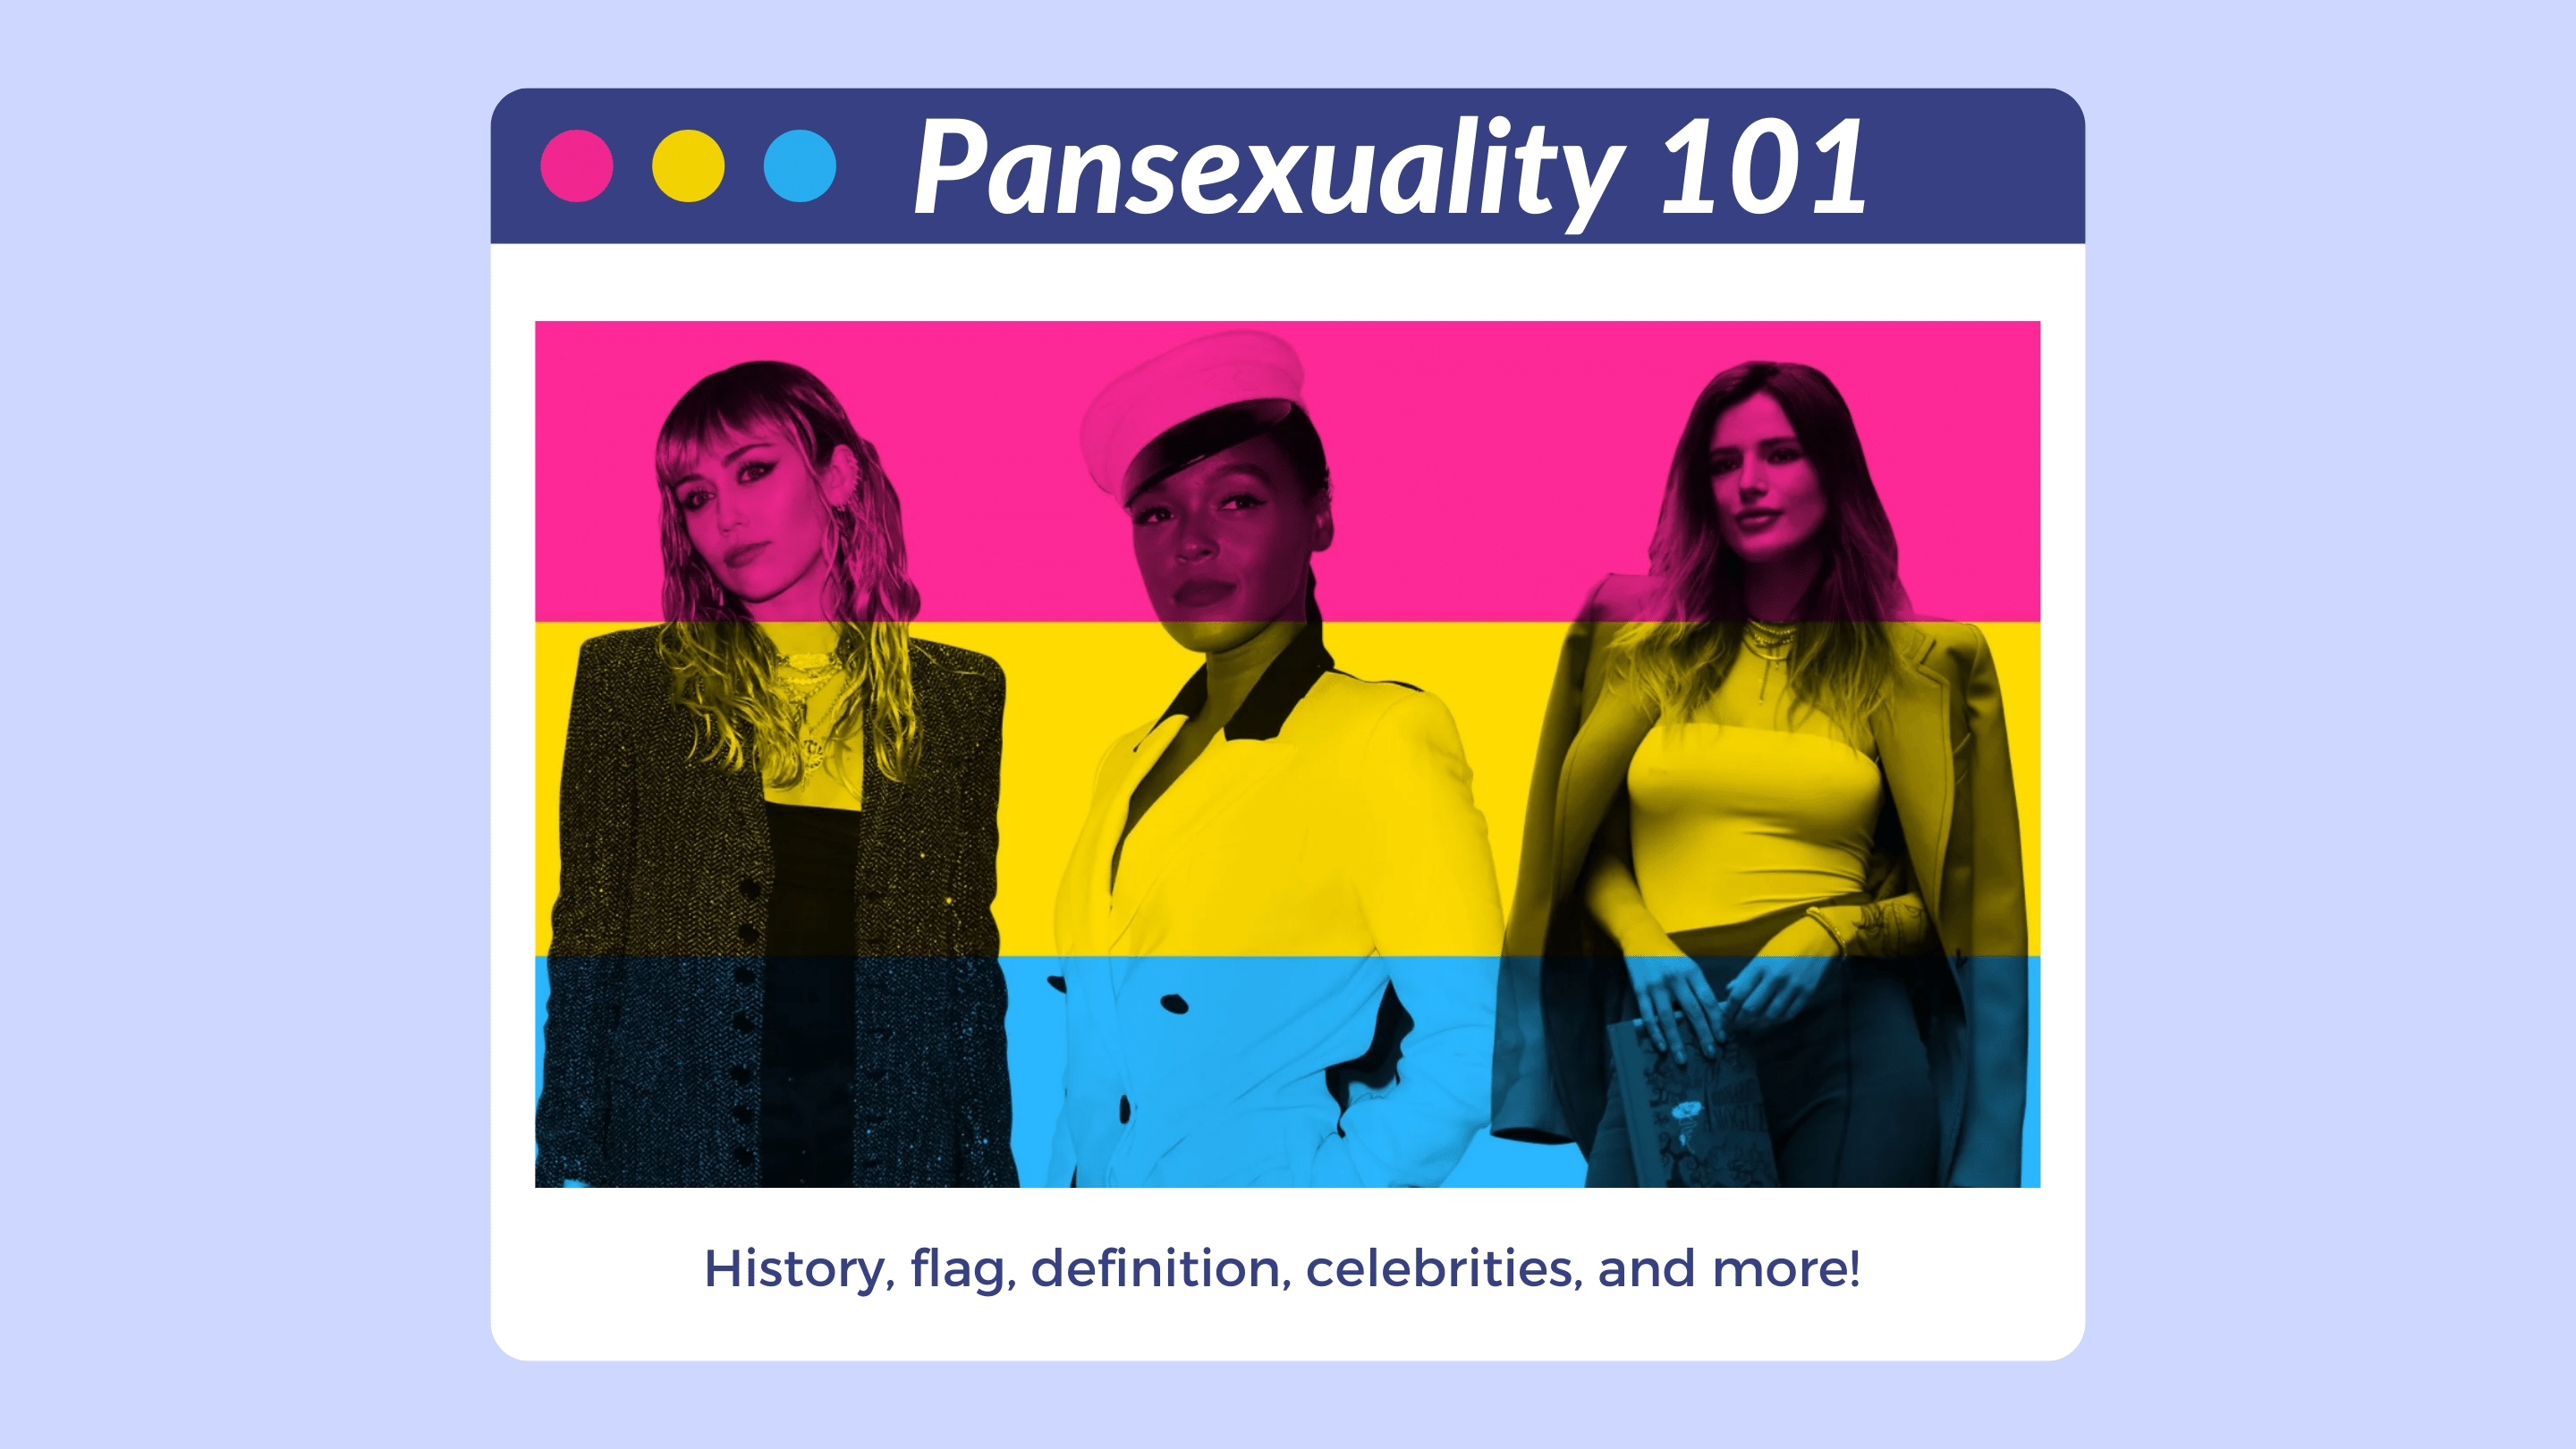 What Is the Pansexual Flag and Who Does It Represent?